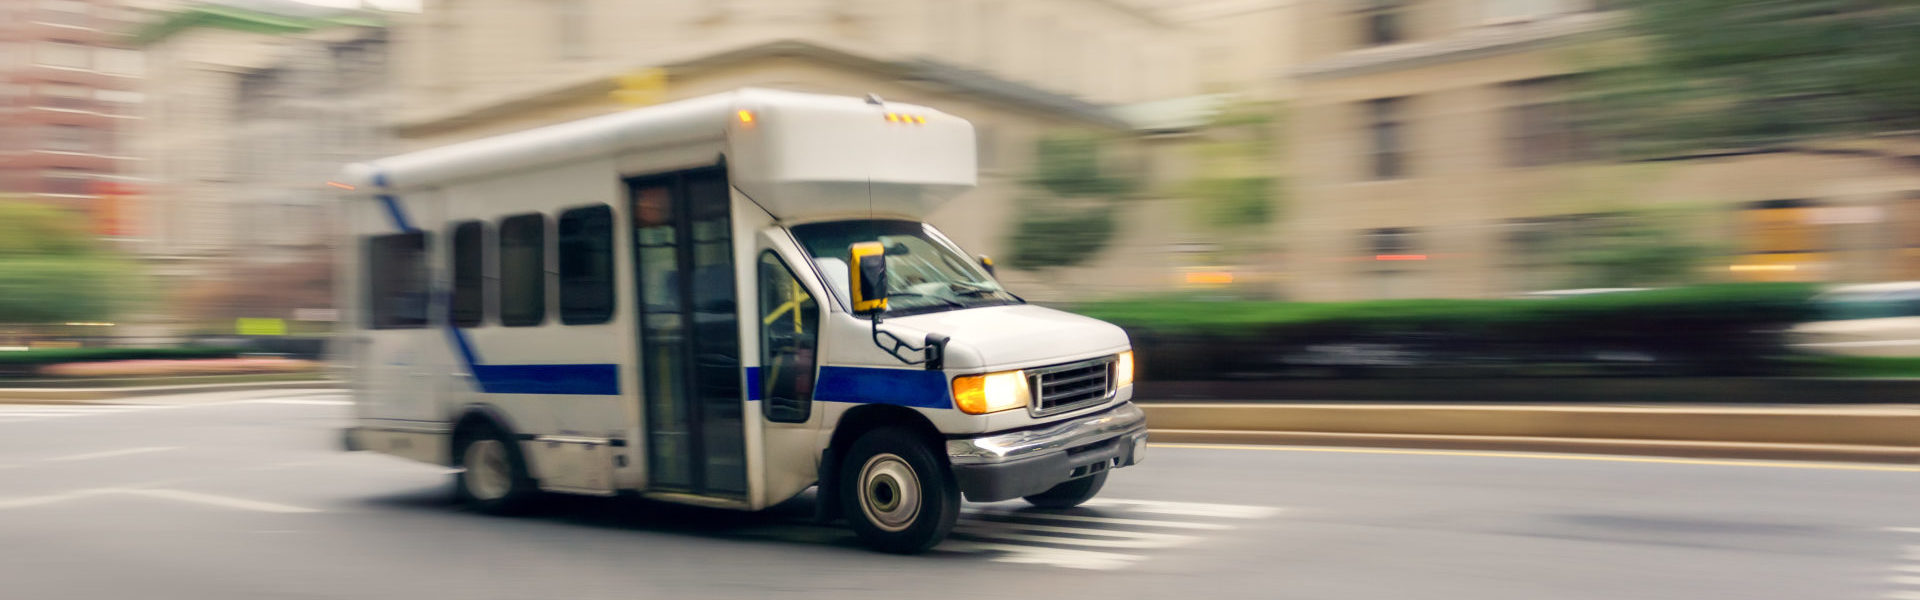 Public transportation insurance NEMT header, a small non-emergency transportation bus on a city street with motion blur background.